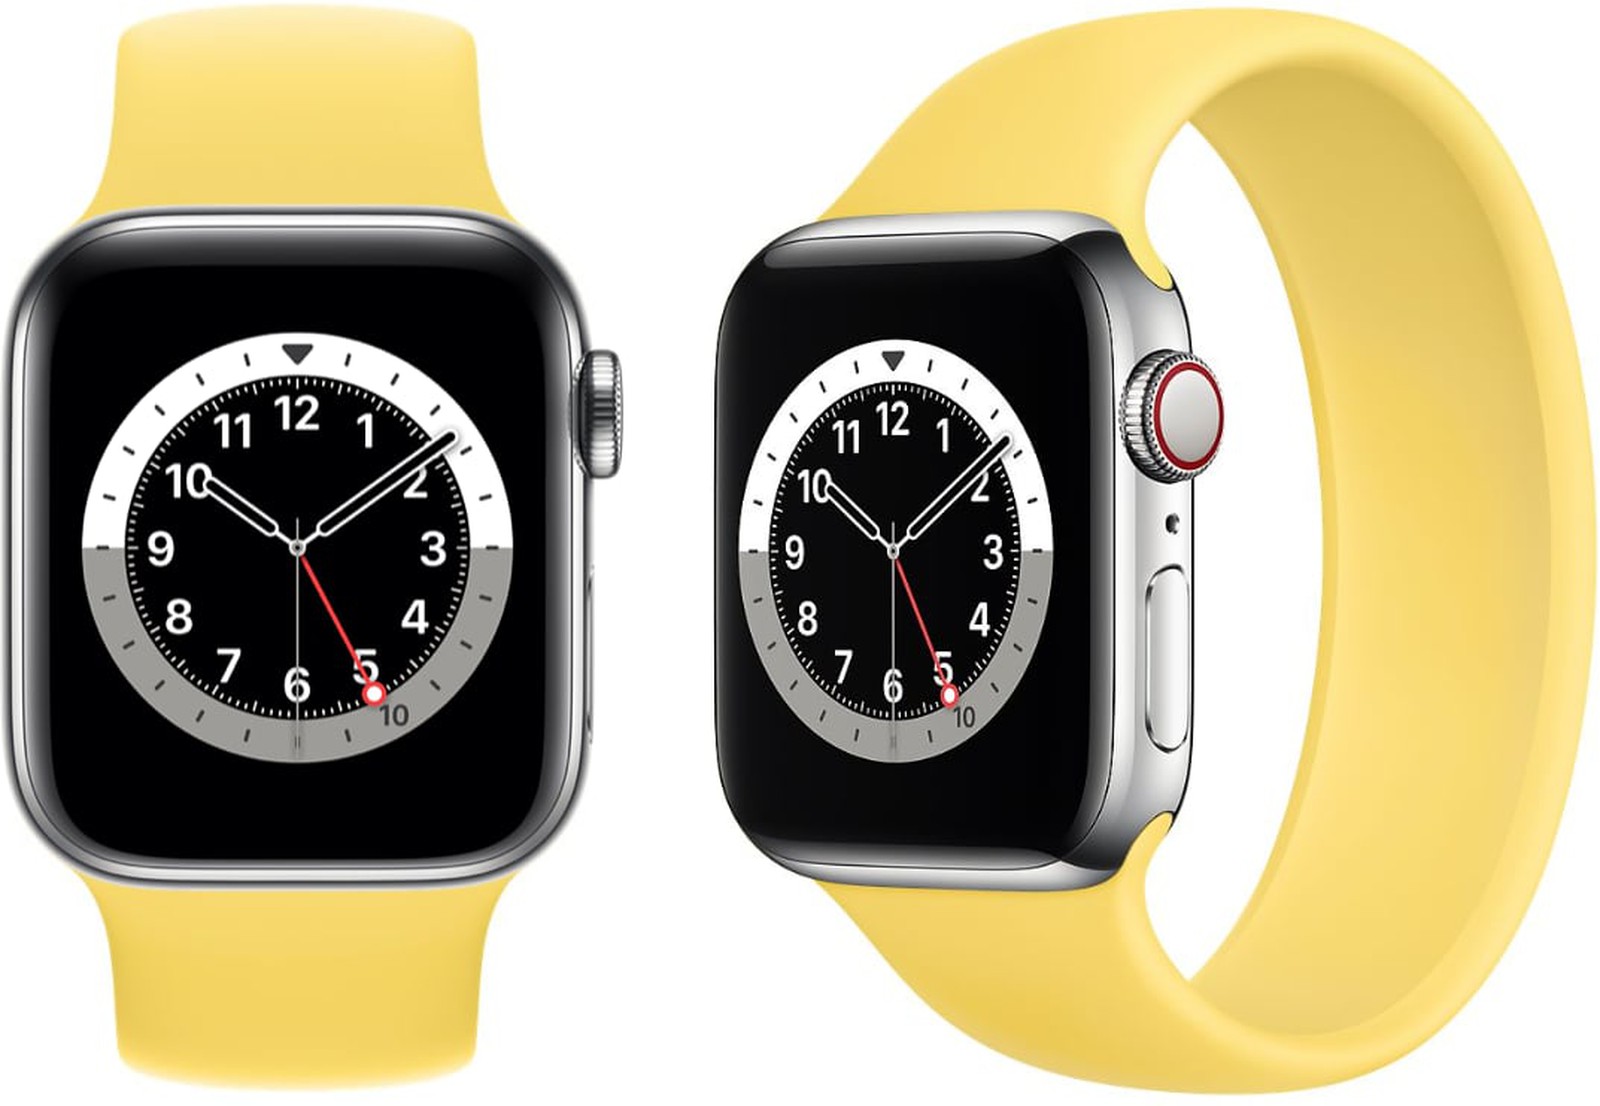 Apple Watch Series 6 iTouch Stores